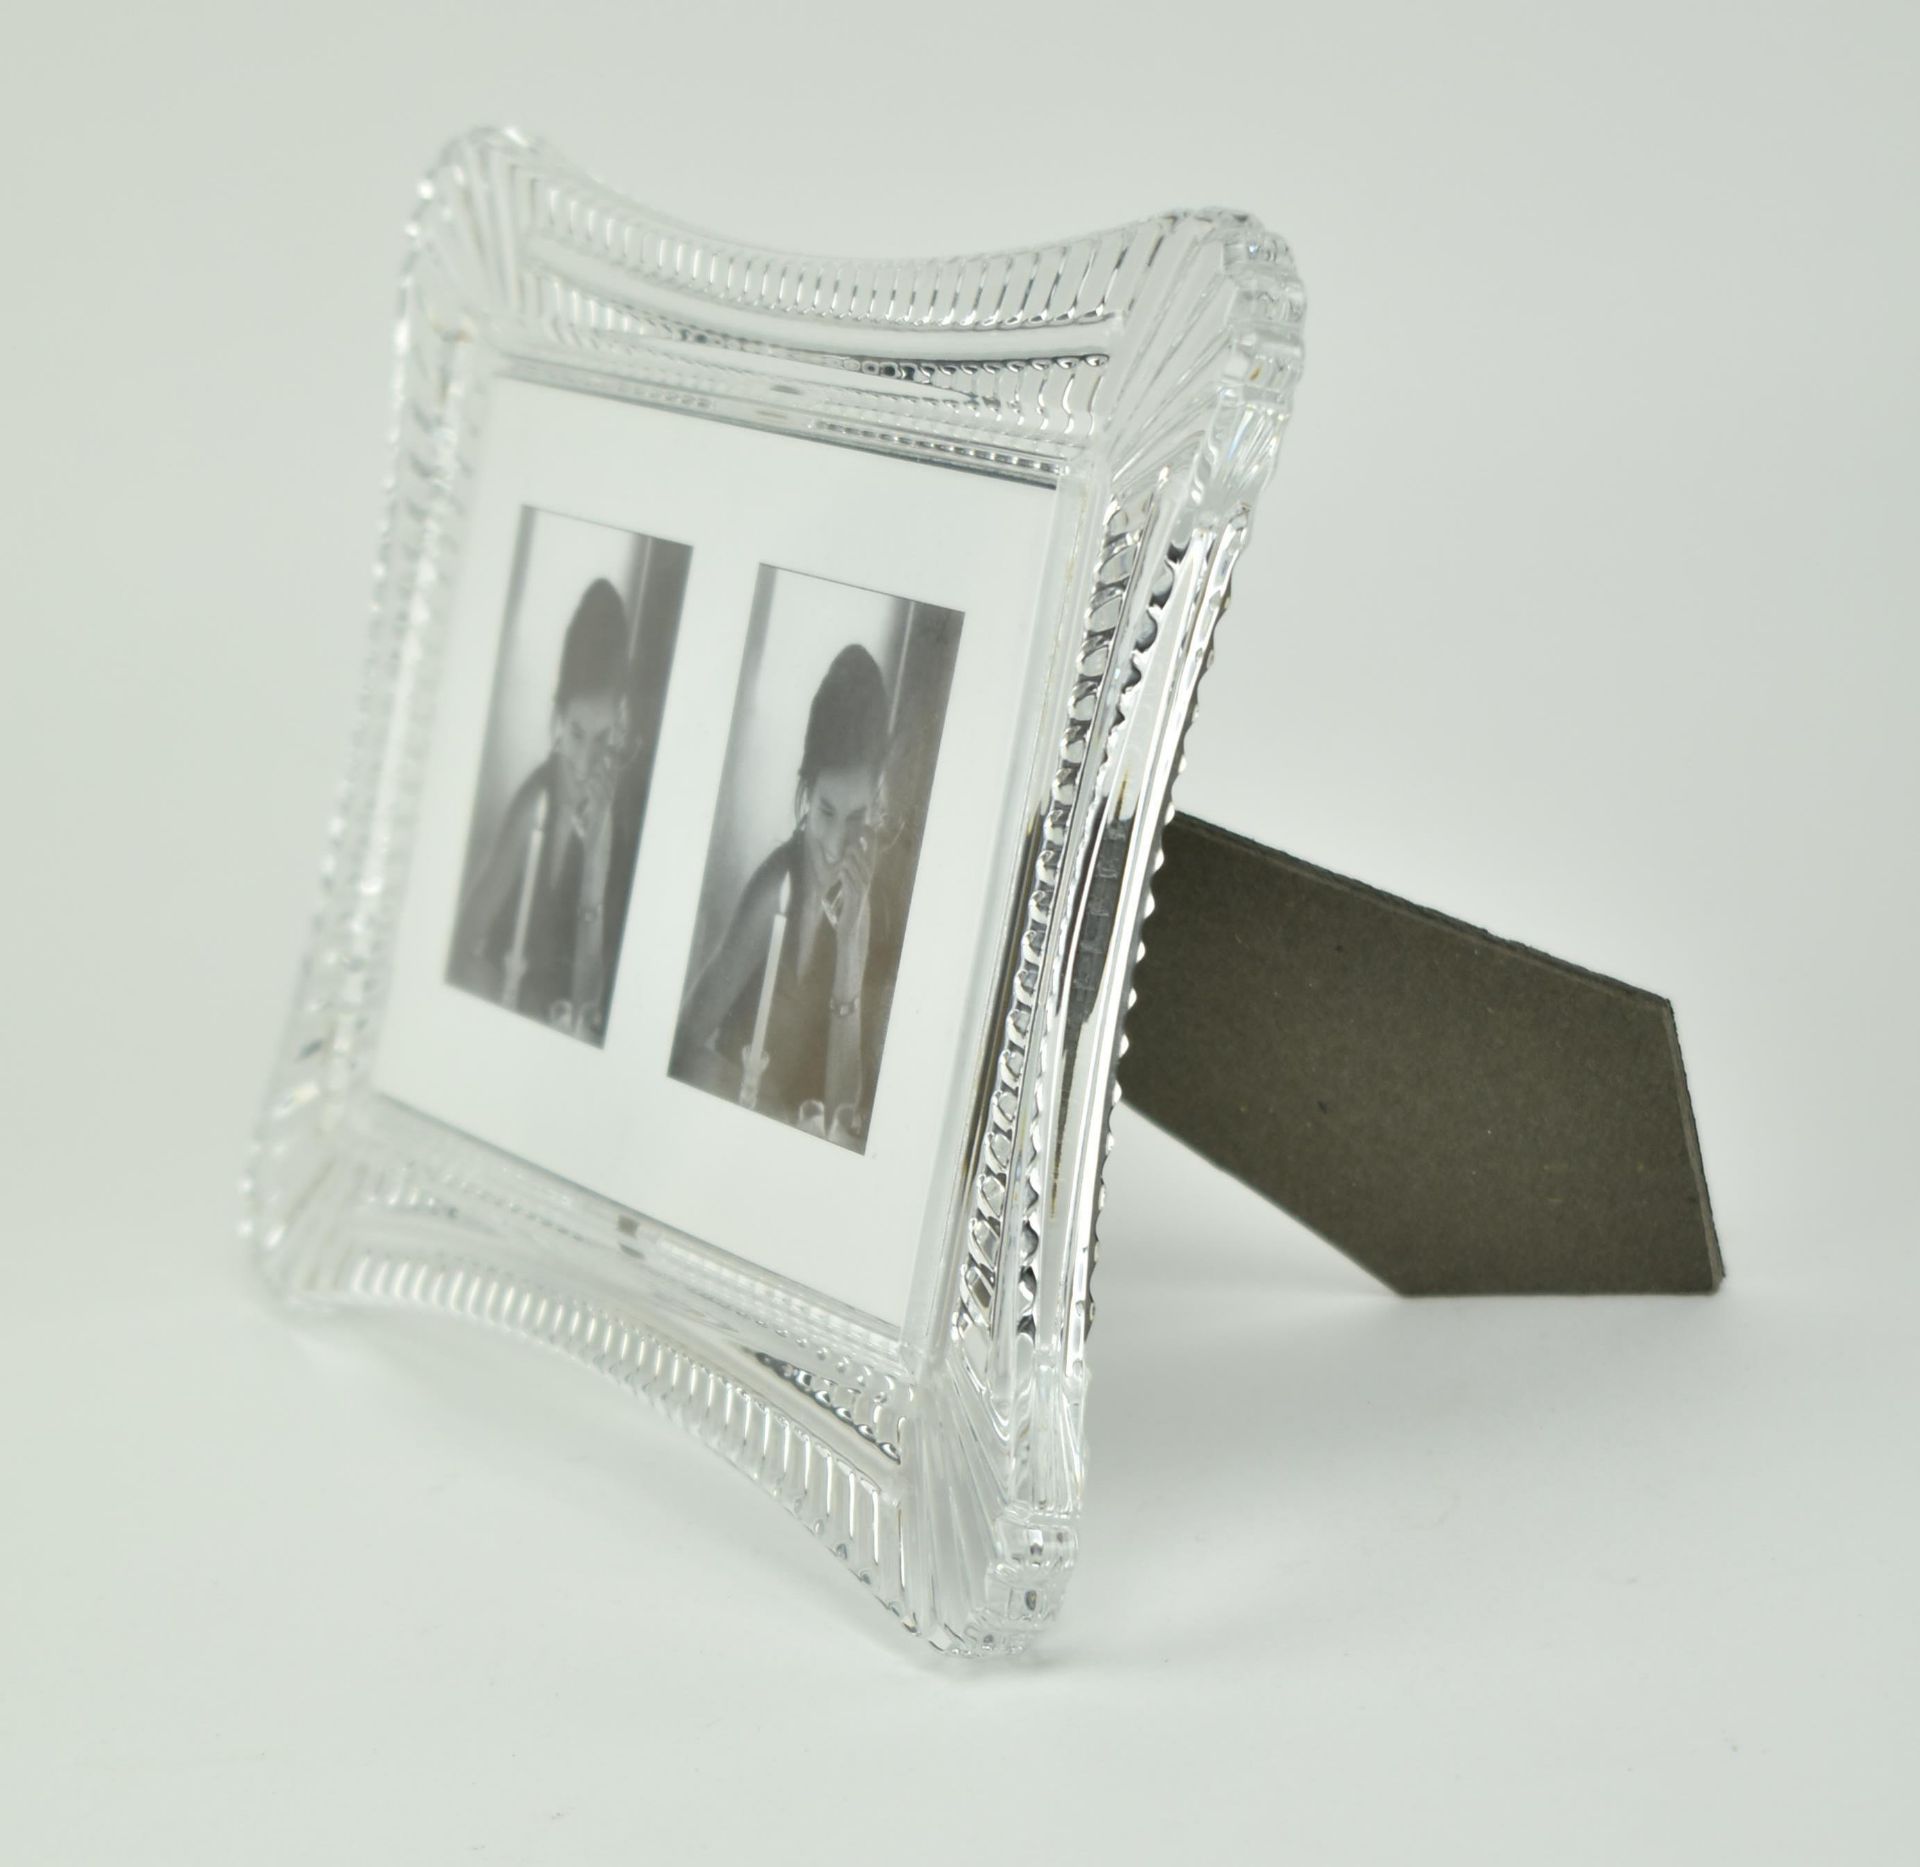 WATERFORD CRYSTAL - TWO VINTAGE GLASS PHOTOGRAPH FRAMES - Image 2 of 7